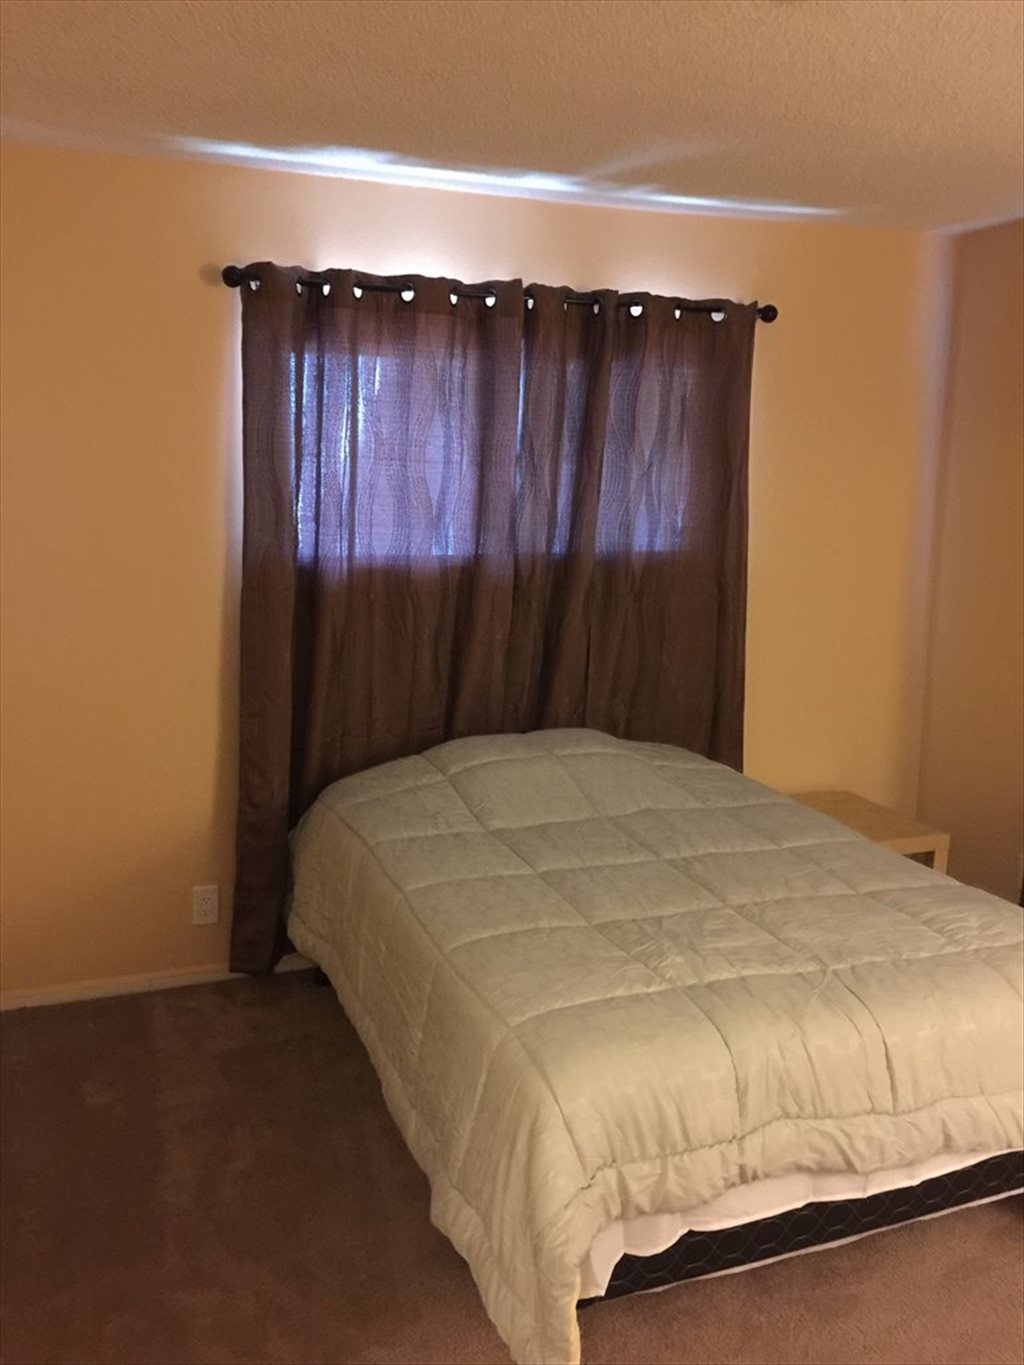 Room For Rent In East Banyan Lane Northeast Anaheim Large Furnished Room For Rent 800 Per Month All Utilities Included Available Now 800